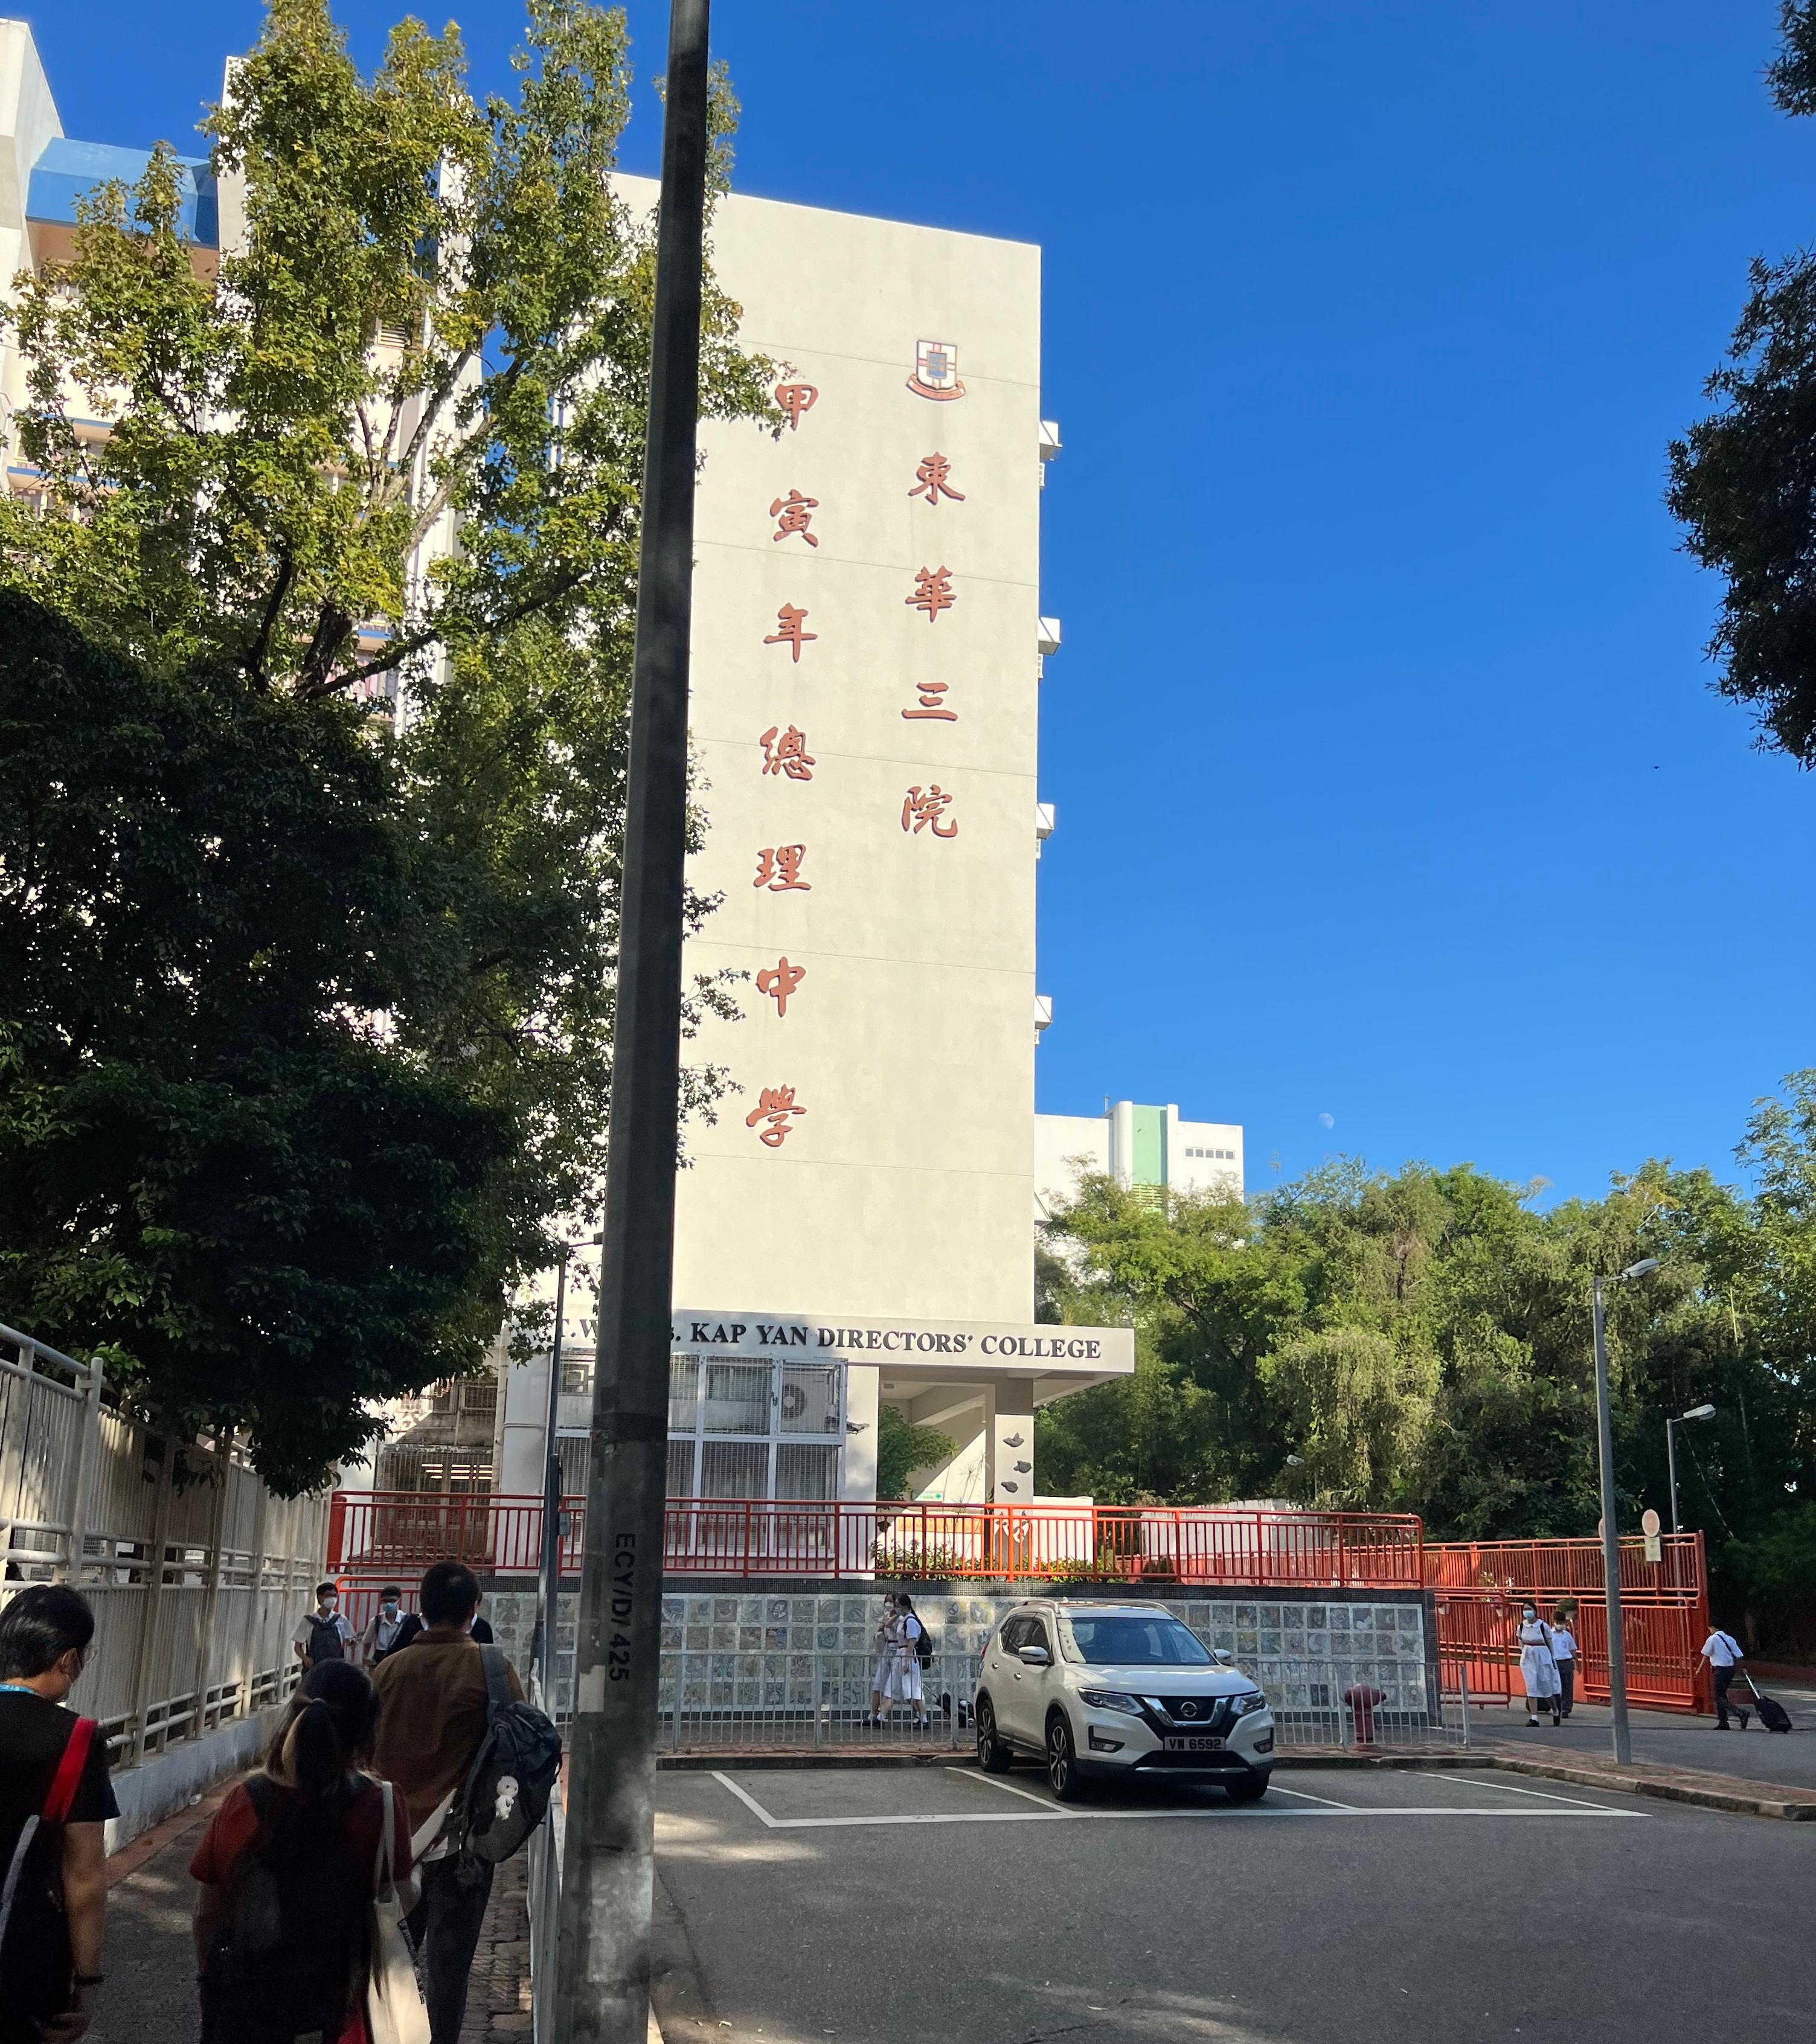 The Government has made a special arrangement for this District Council election by setting up Near Boundary Polling Stations at two schools near the Sheung Shui MTR station to facilitate the electors living in the Mainland to return to Hong Kong to cast their votes. Photo shows the Tung Wah Group of Hospitals Kap Yan Directors' College.